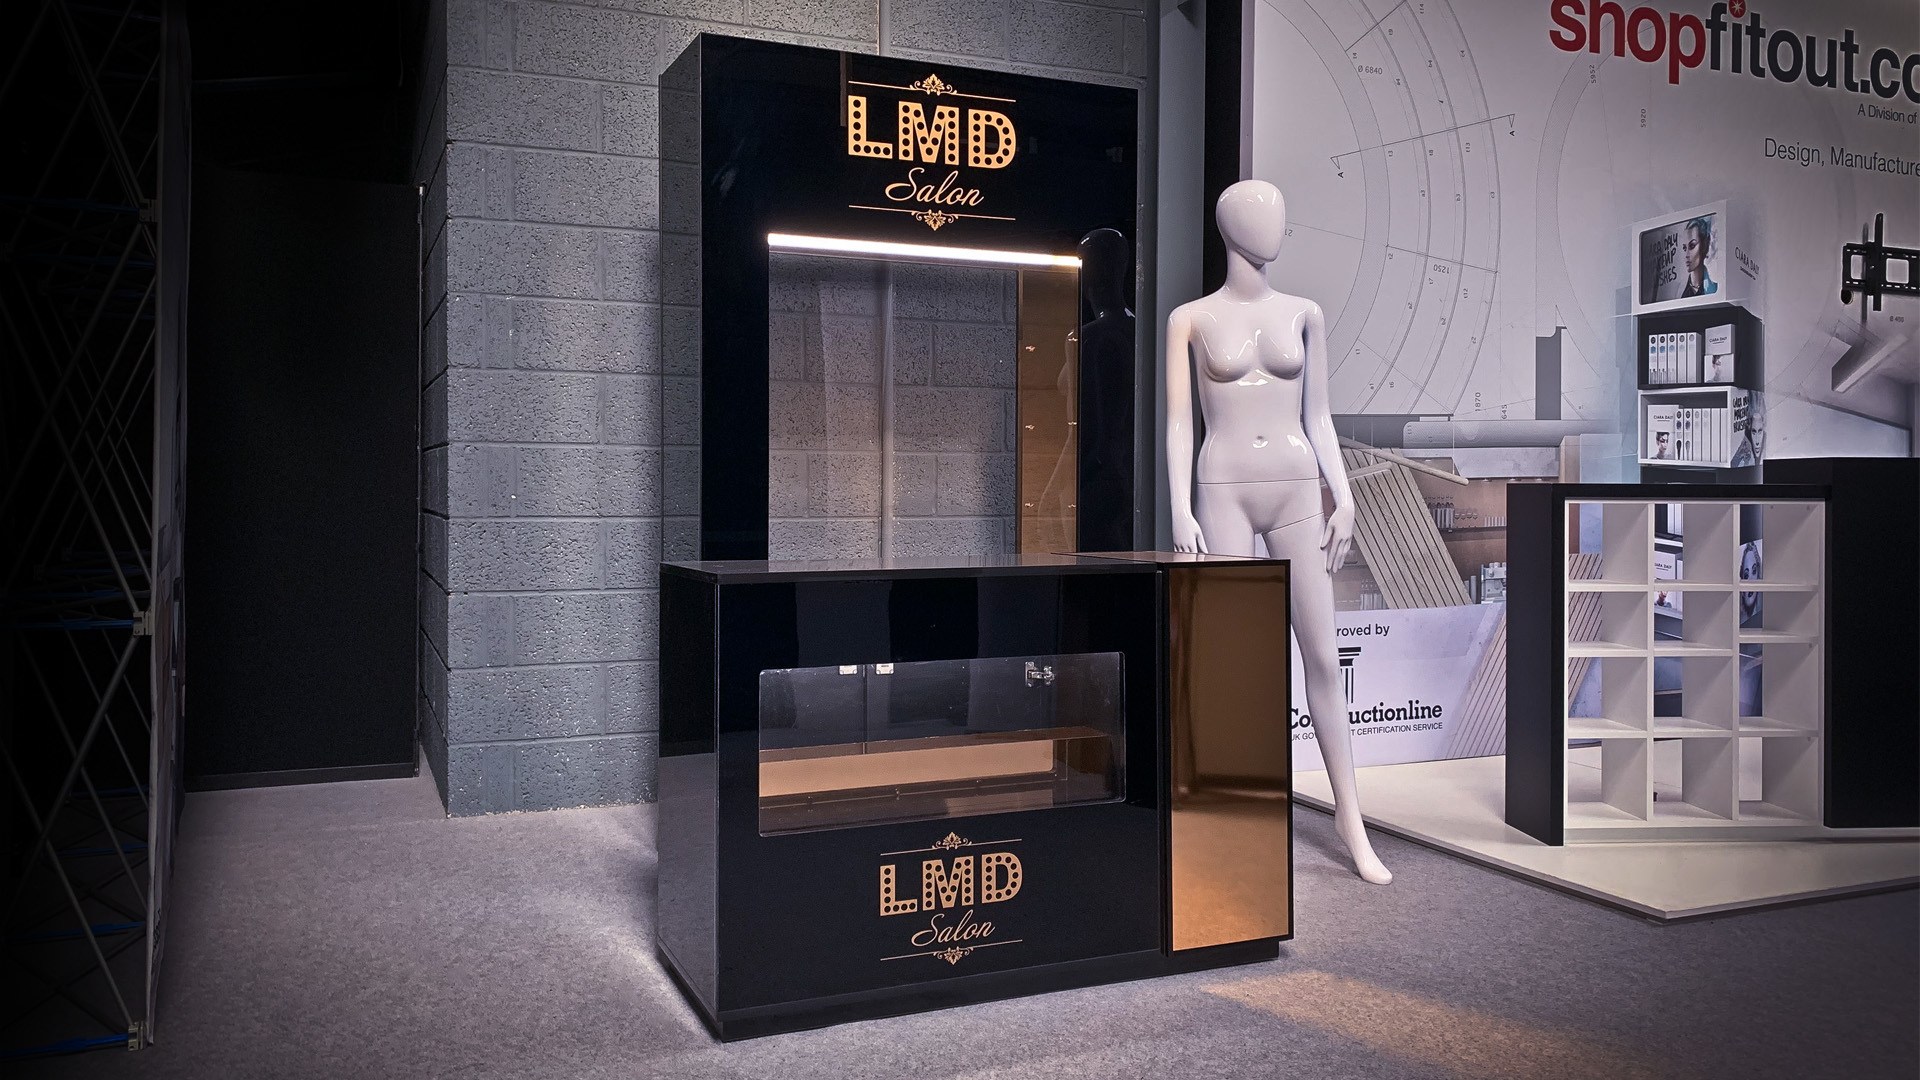 Bespoke designed and manufactured retail unit for LMD Belfast